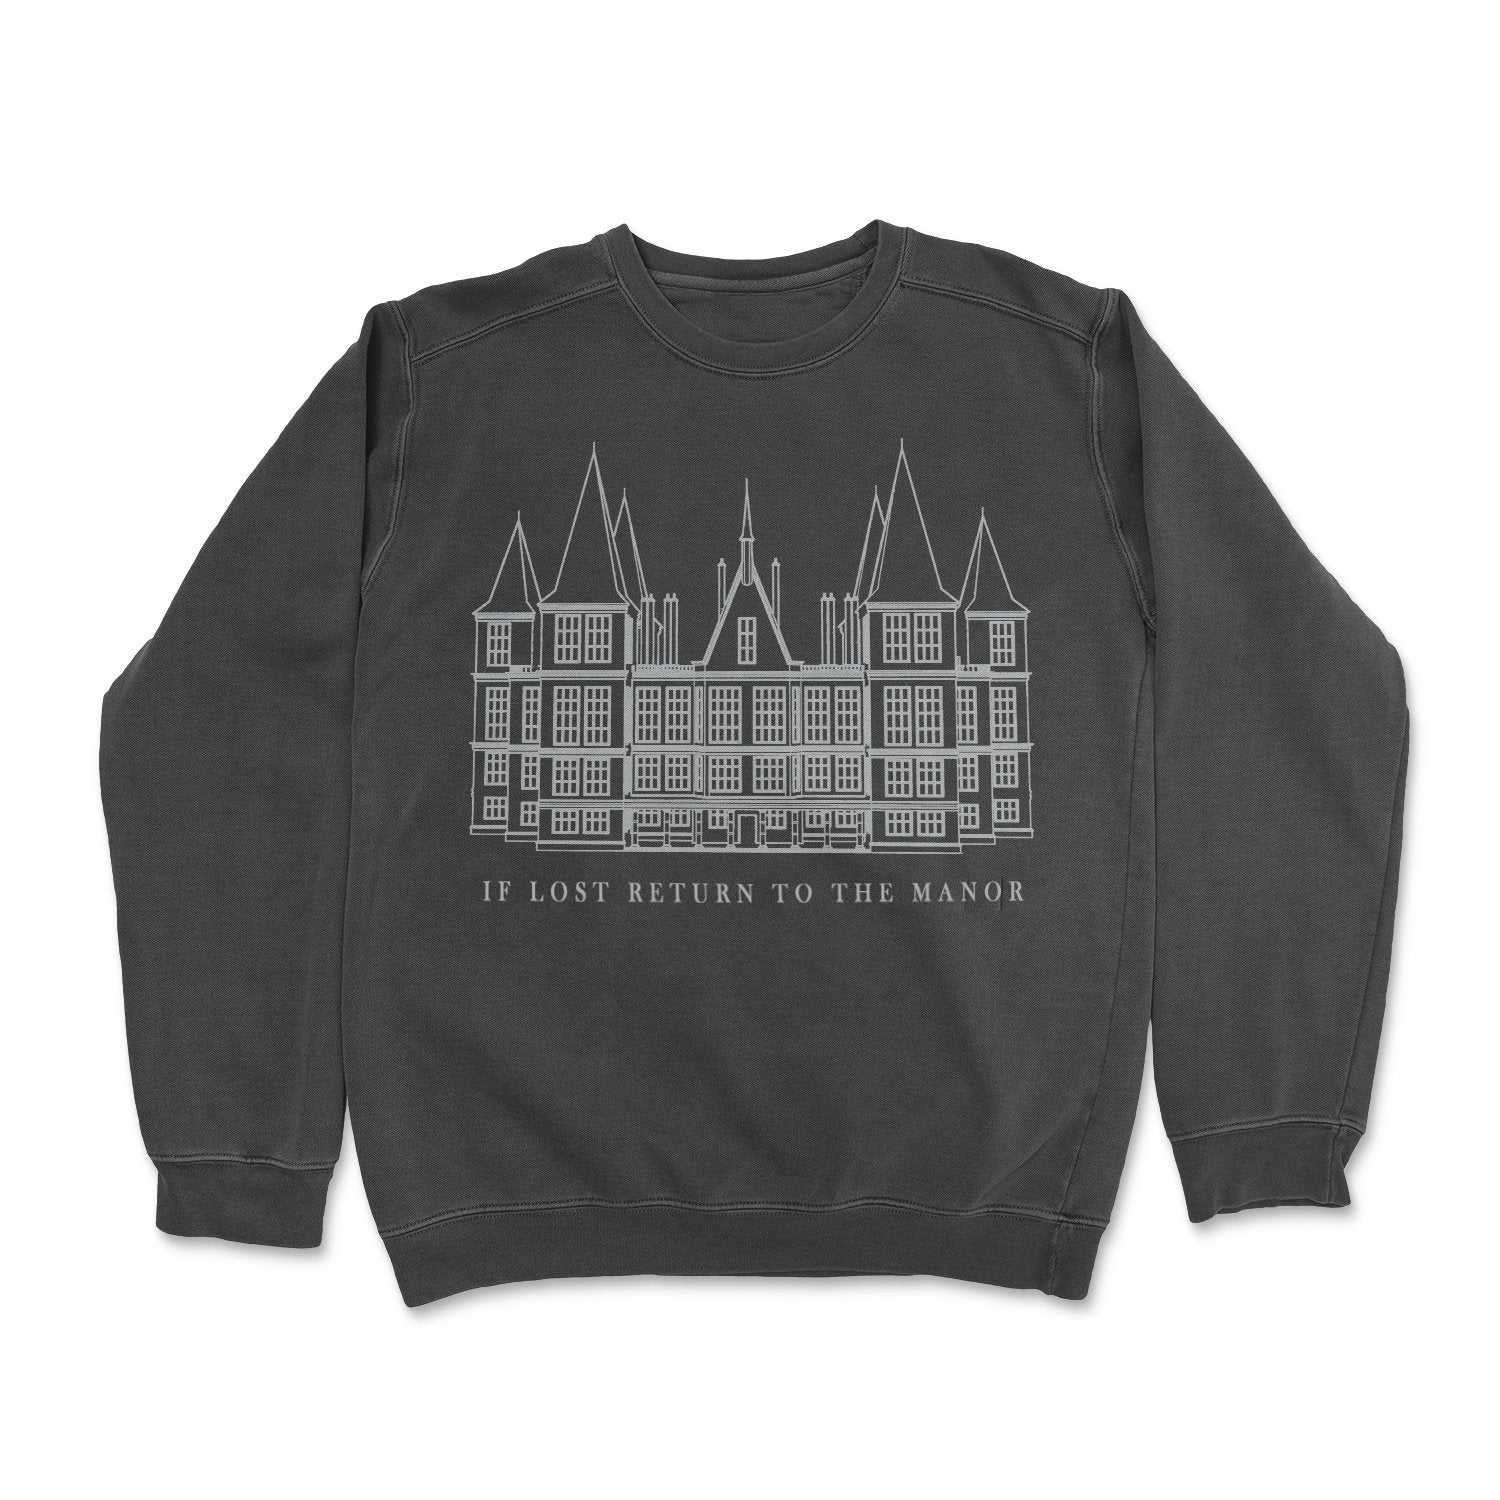 If Lost Return To The Manor Garment Dyed Sweatshirt